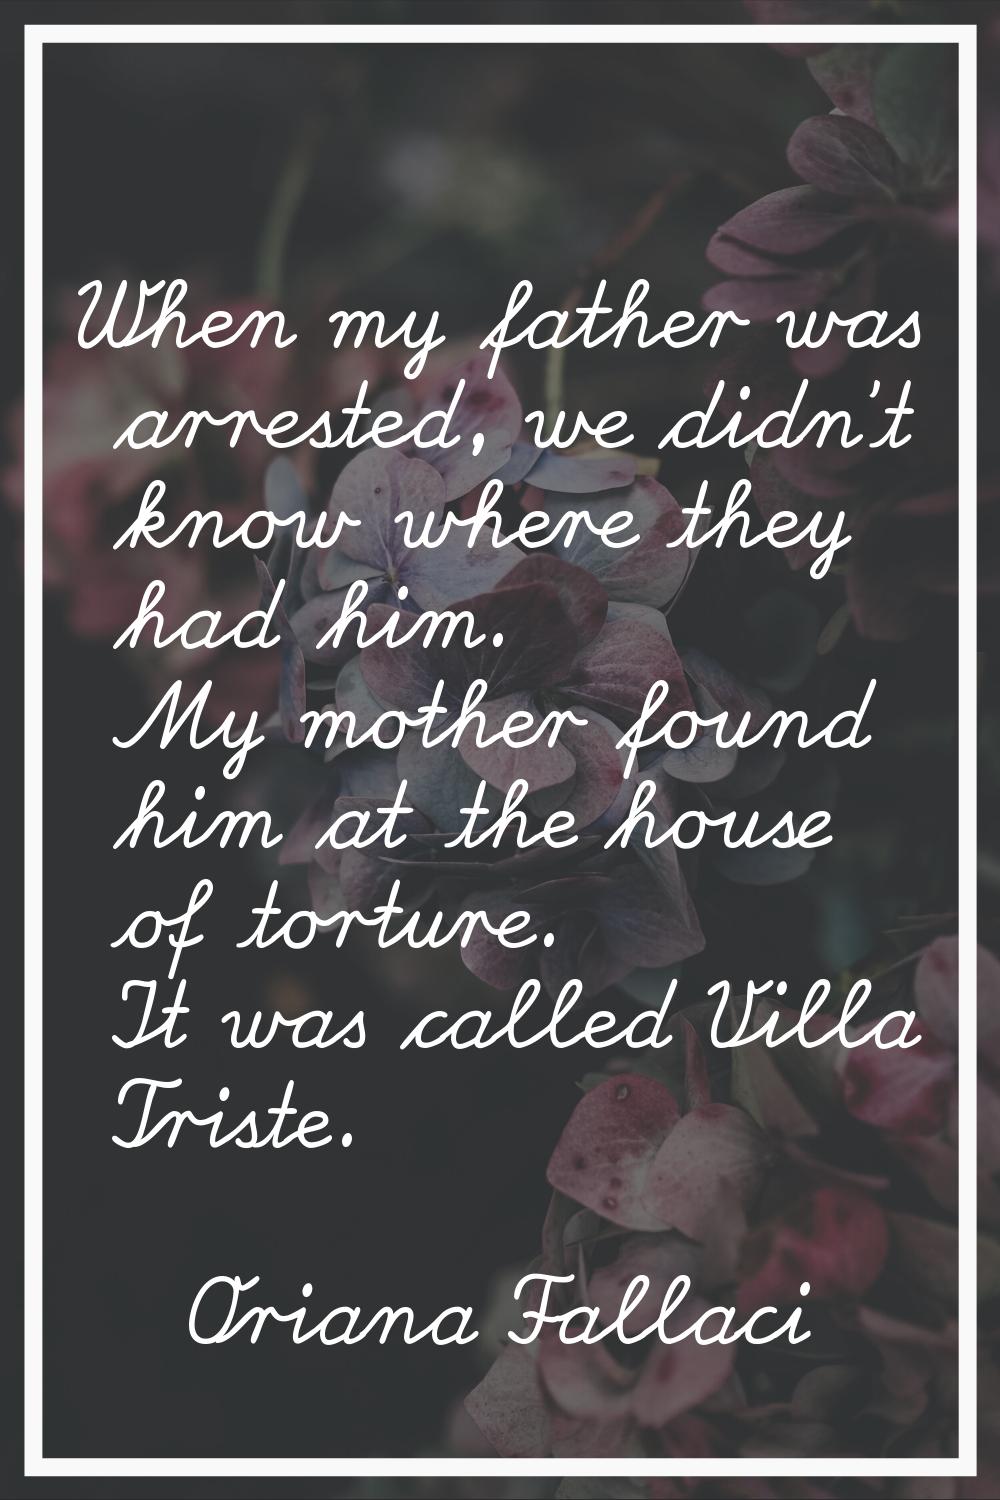 When my father was arrested, we didn't know where they had him. My mother found him at the house of